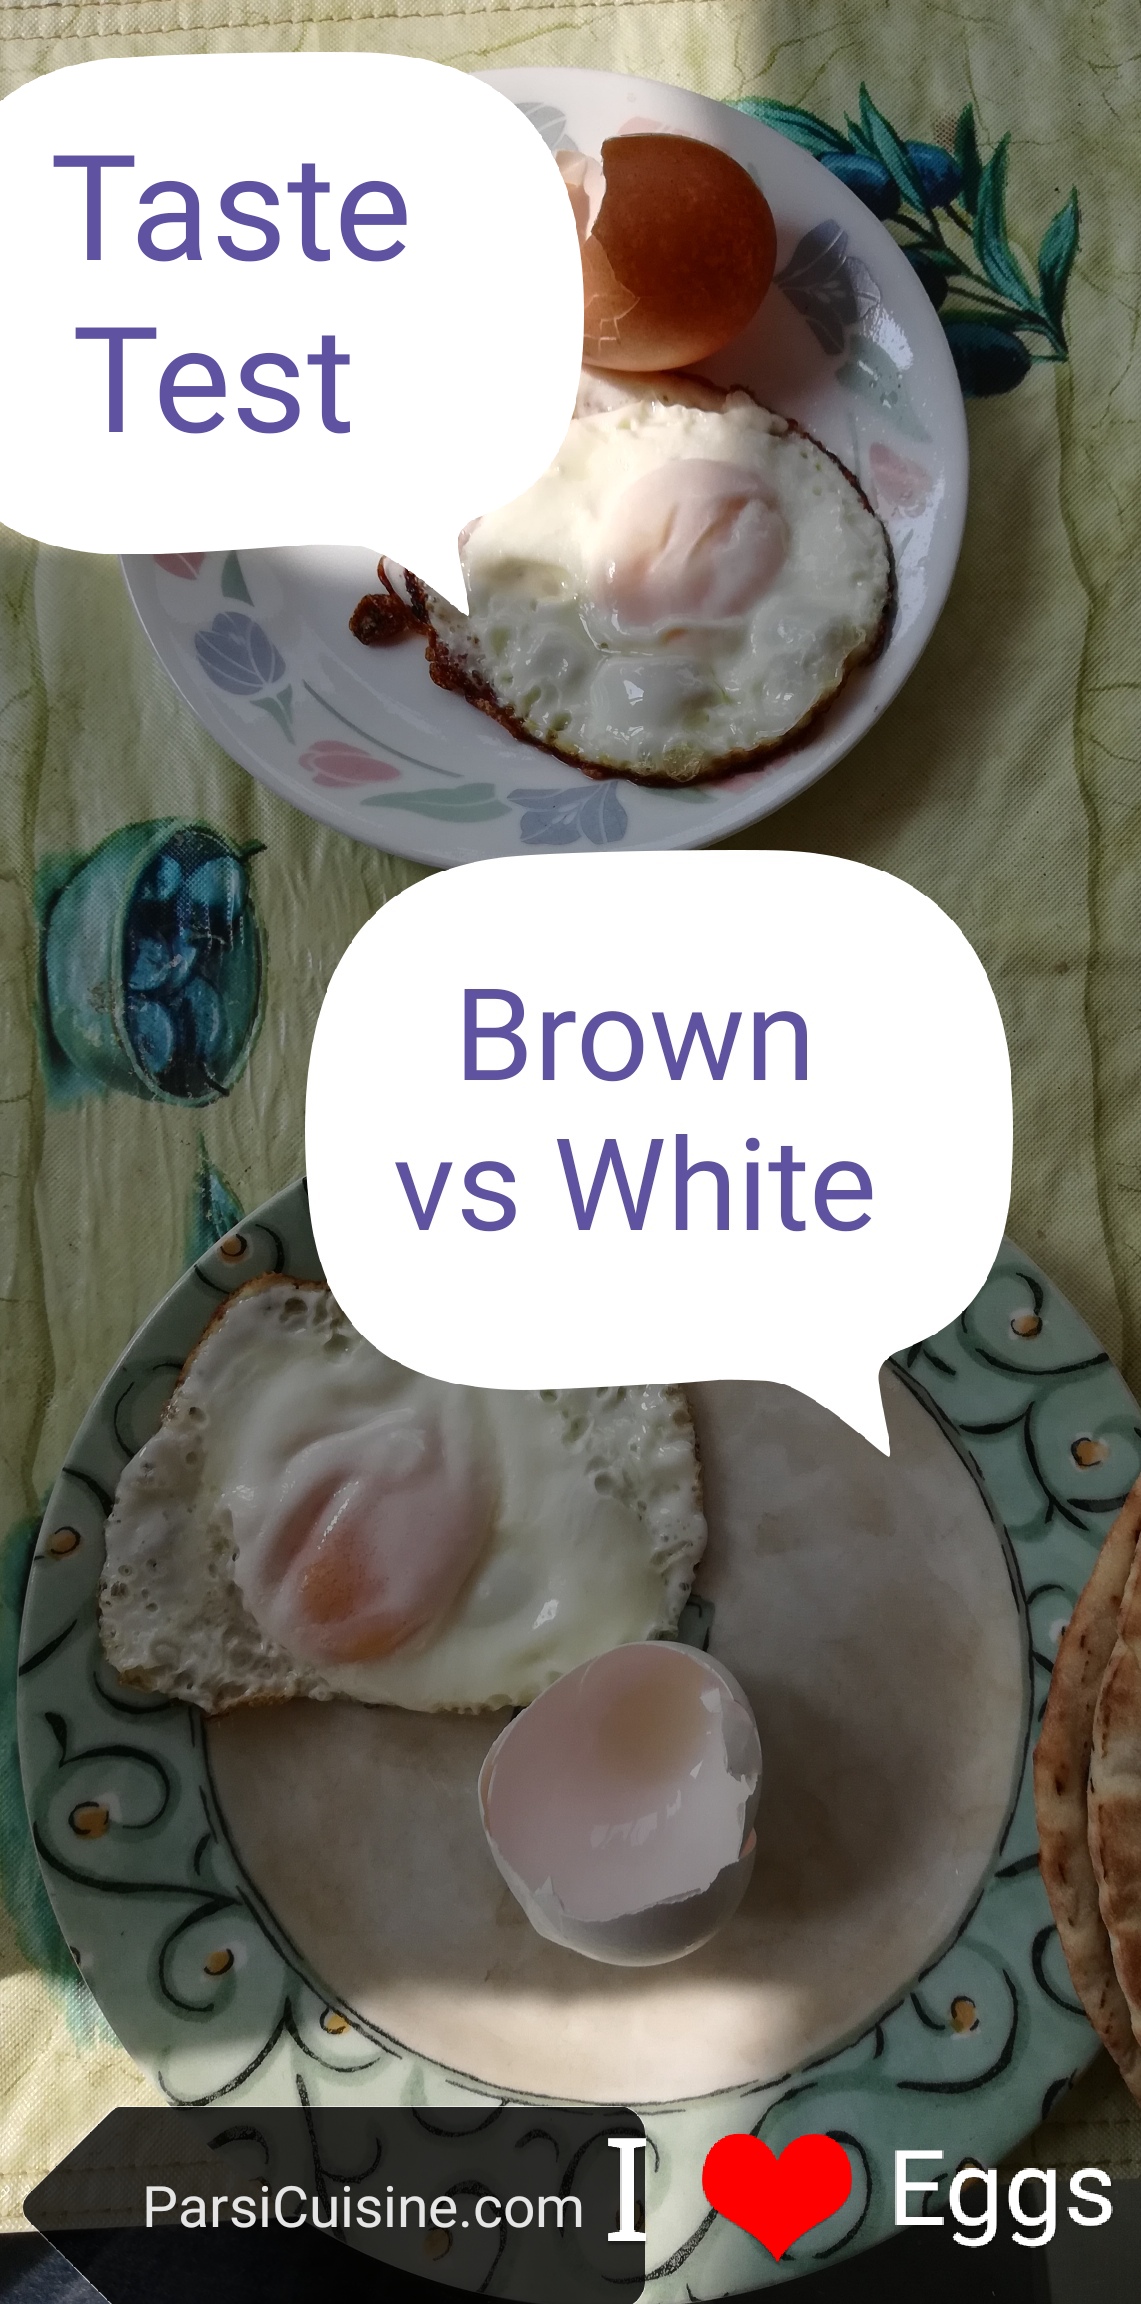 Brown Eggs or White Eggs? Test done in the Parsi Cuisine Kitchen